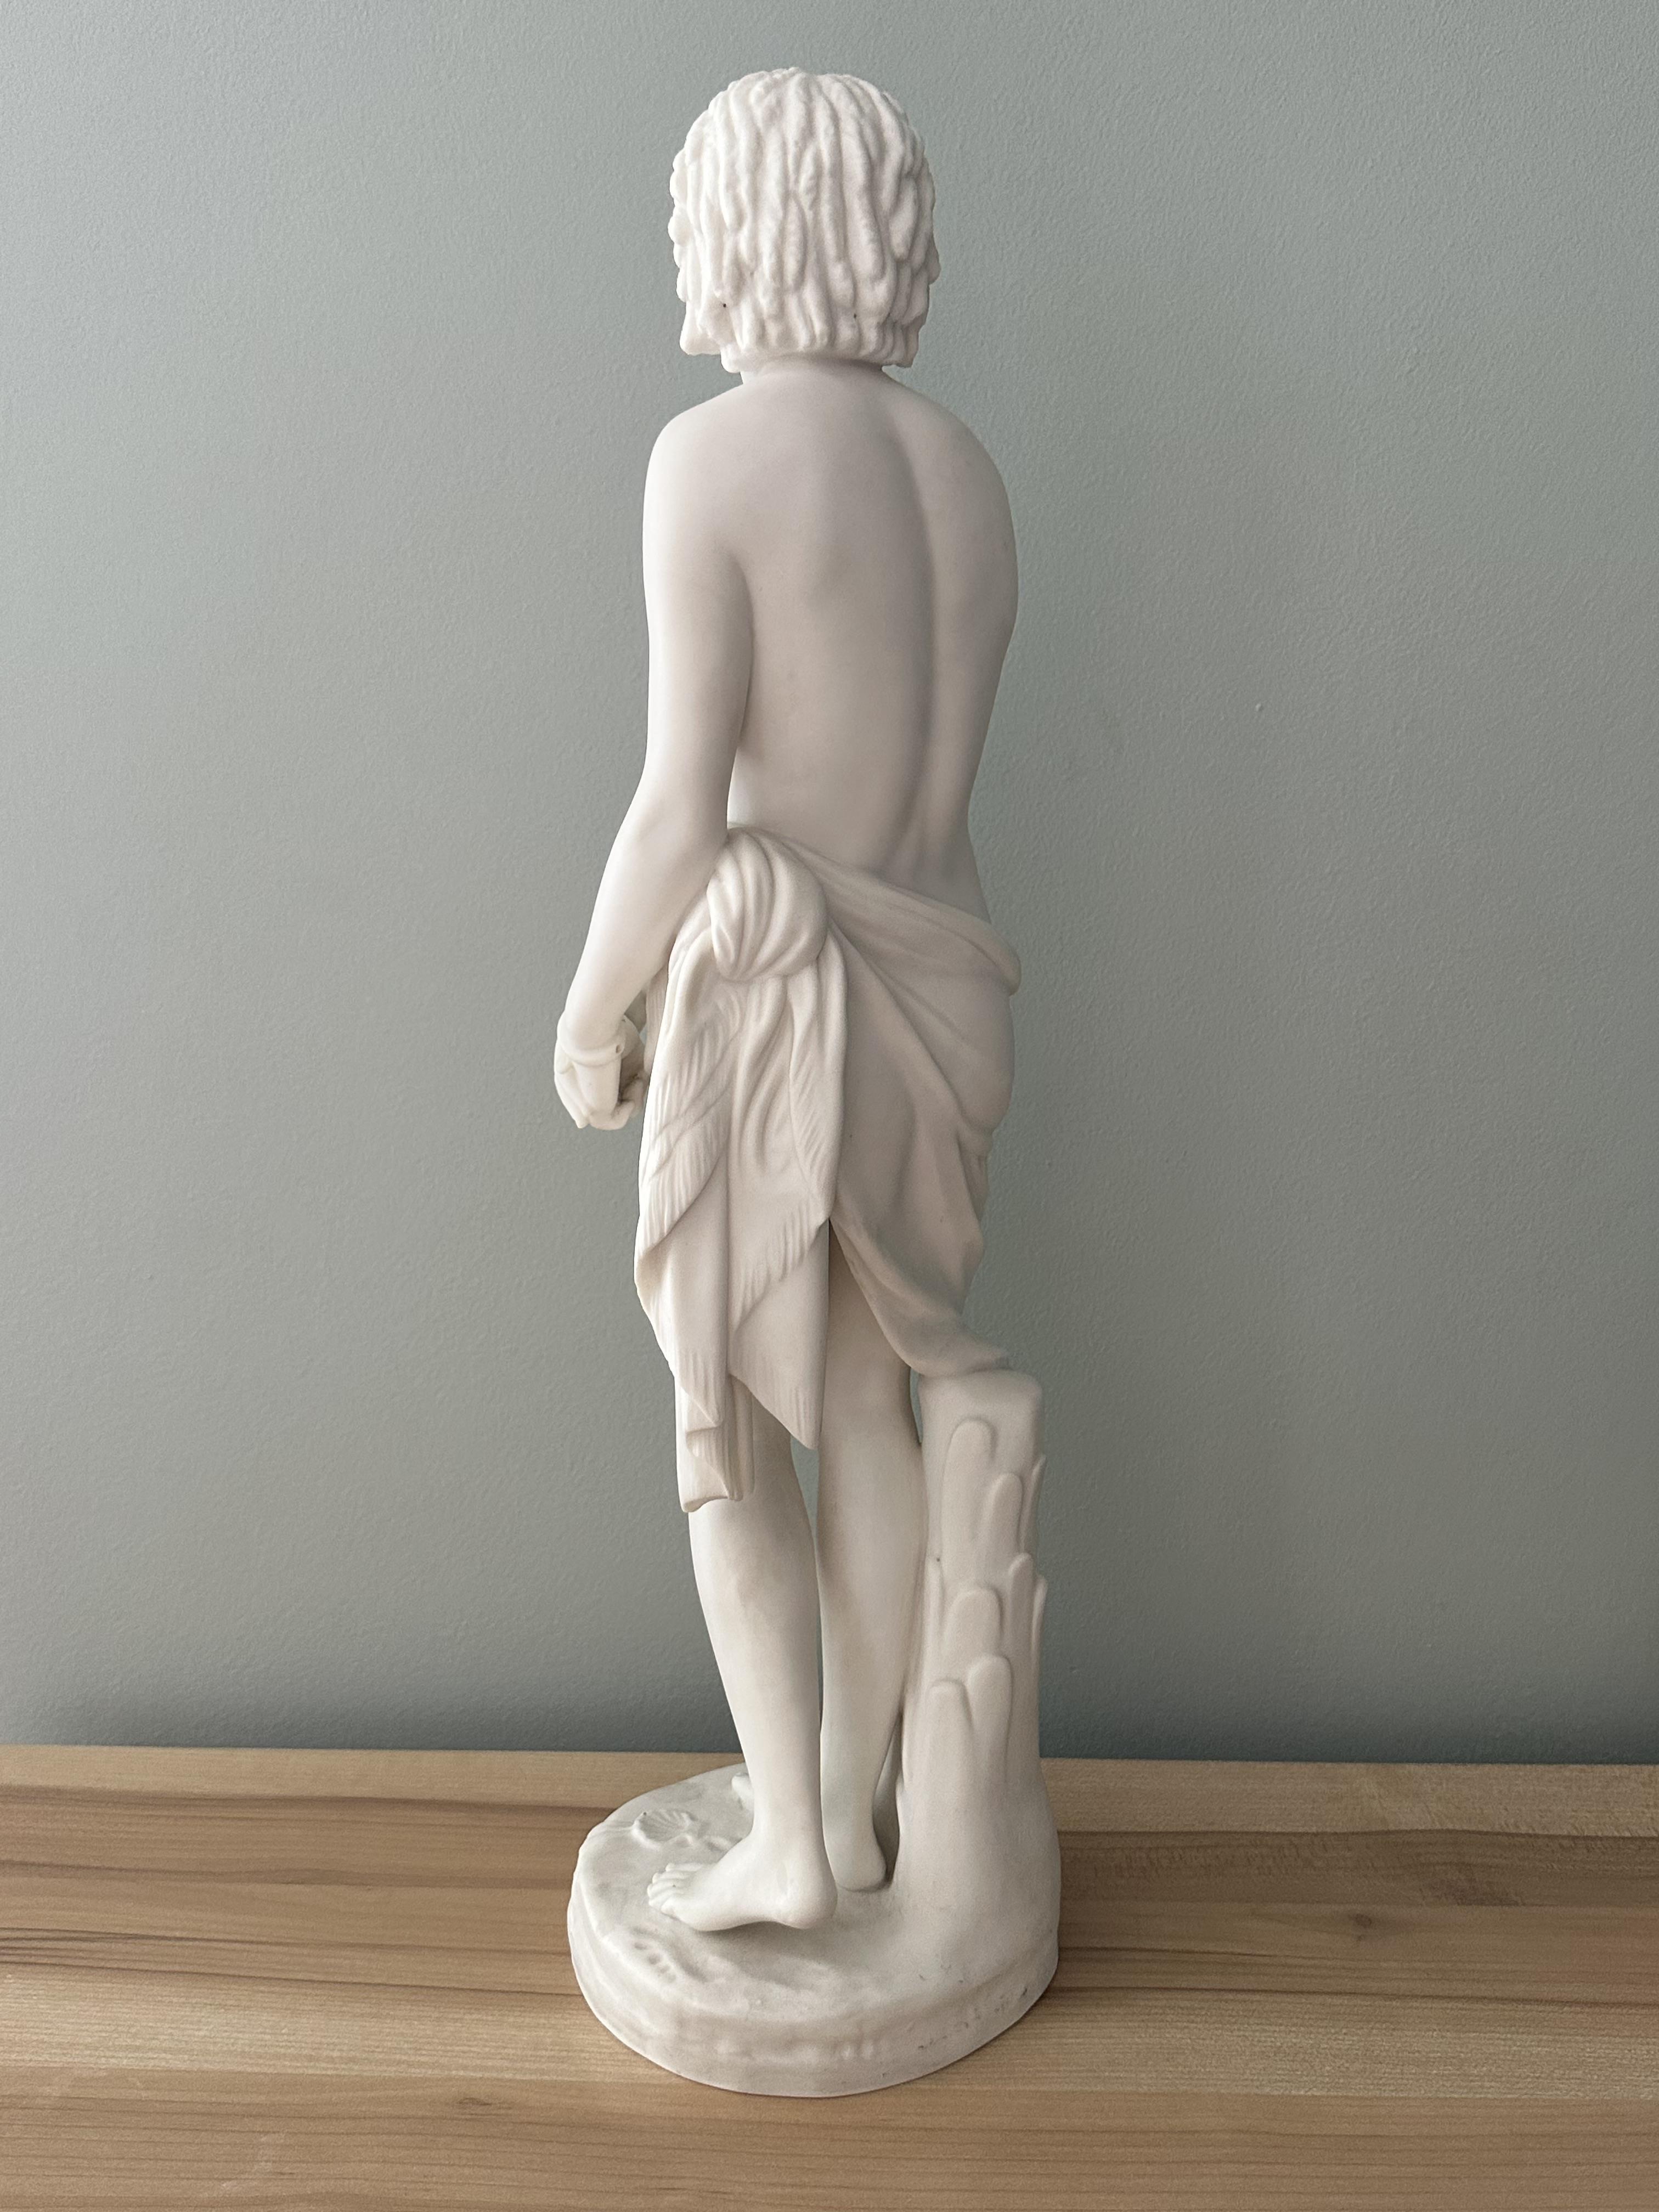 Parian Ware Minton Sculpture by John Bell. One ha - Image 5 of 16